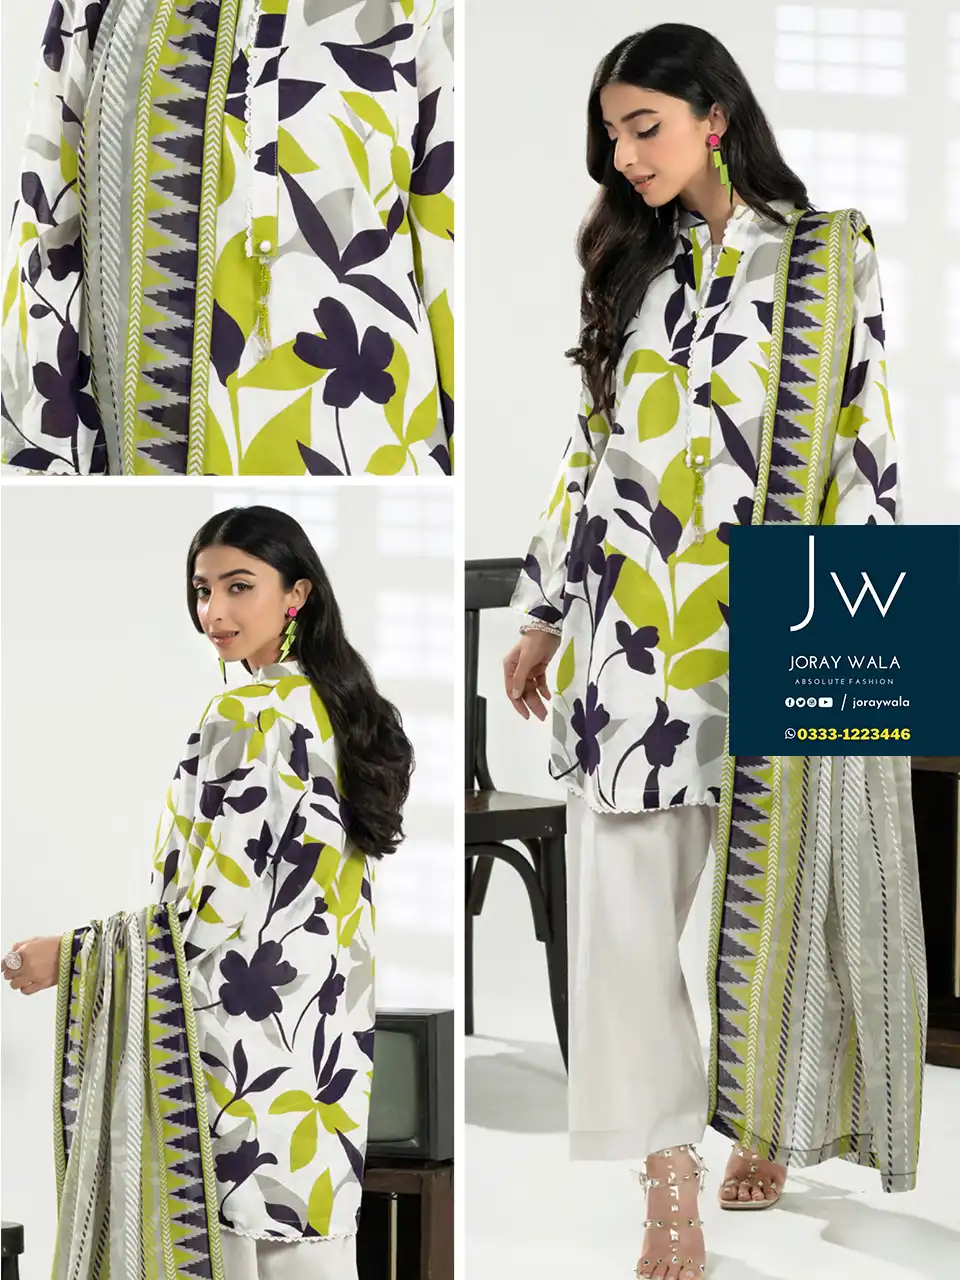 ZESH Printed Pop Series D1 available at joraywala with free delivery